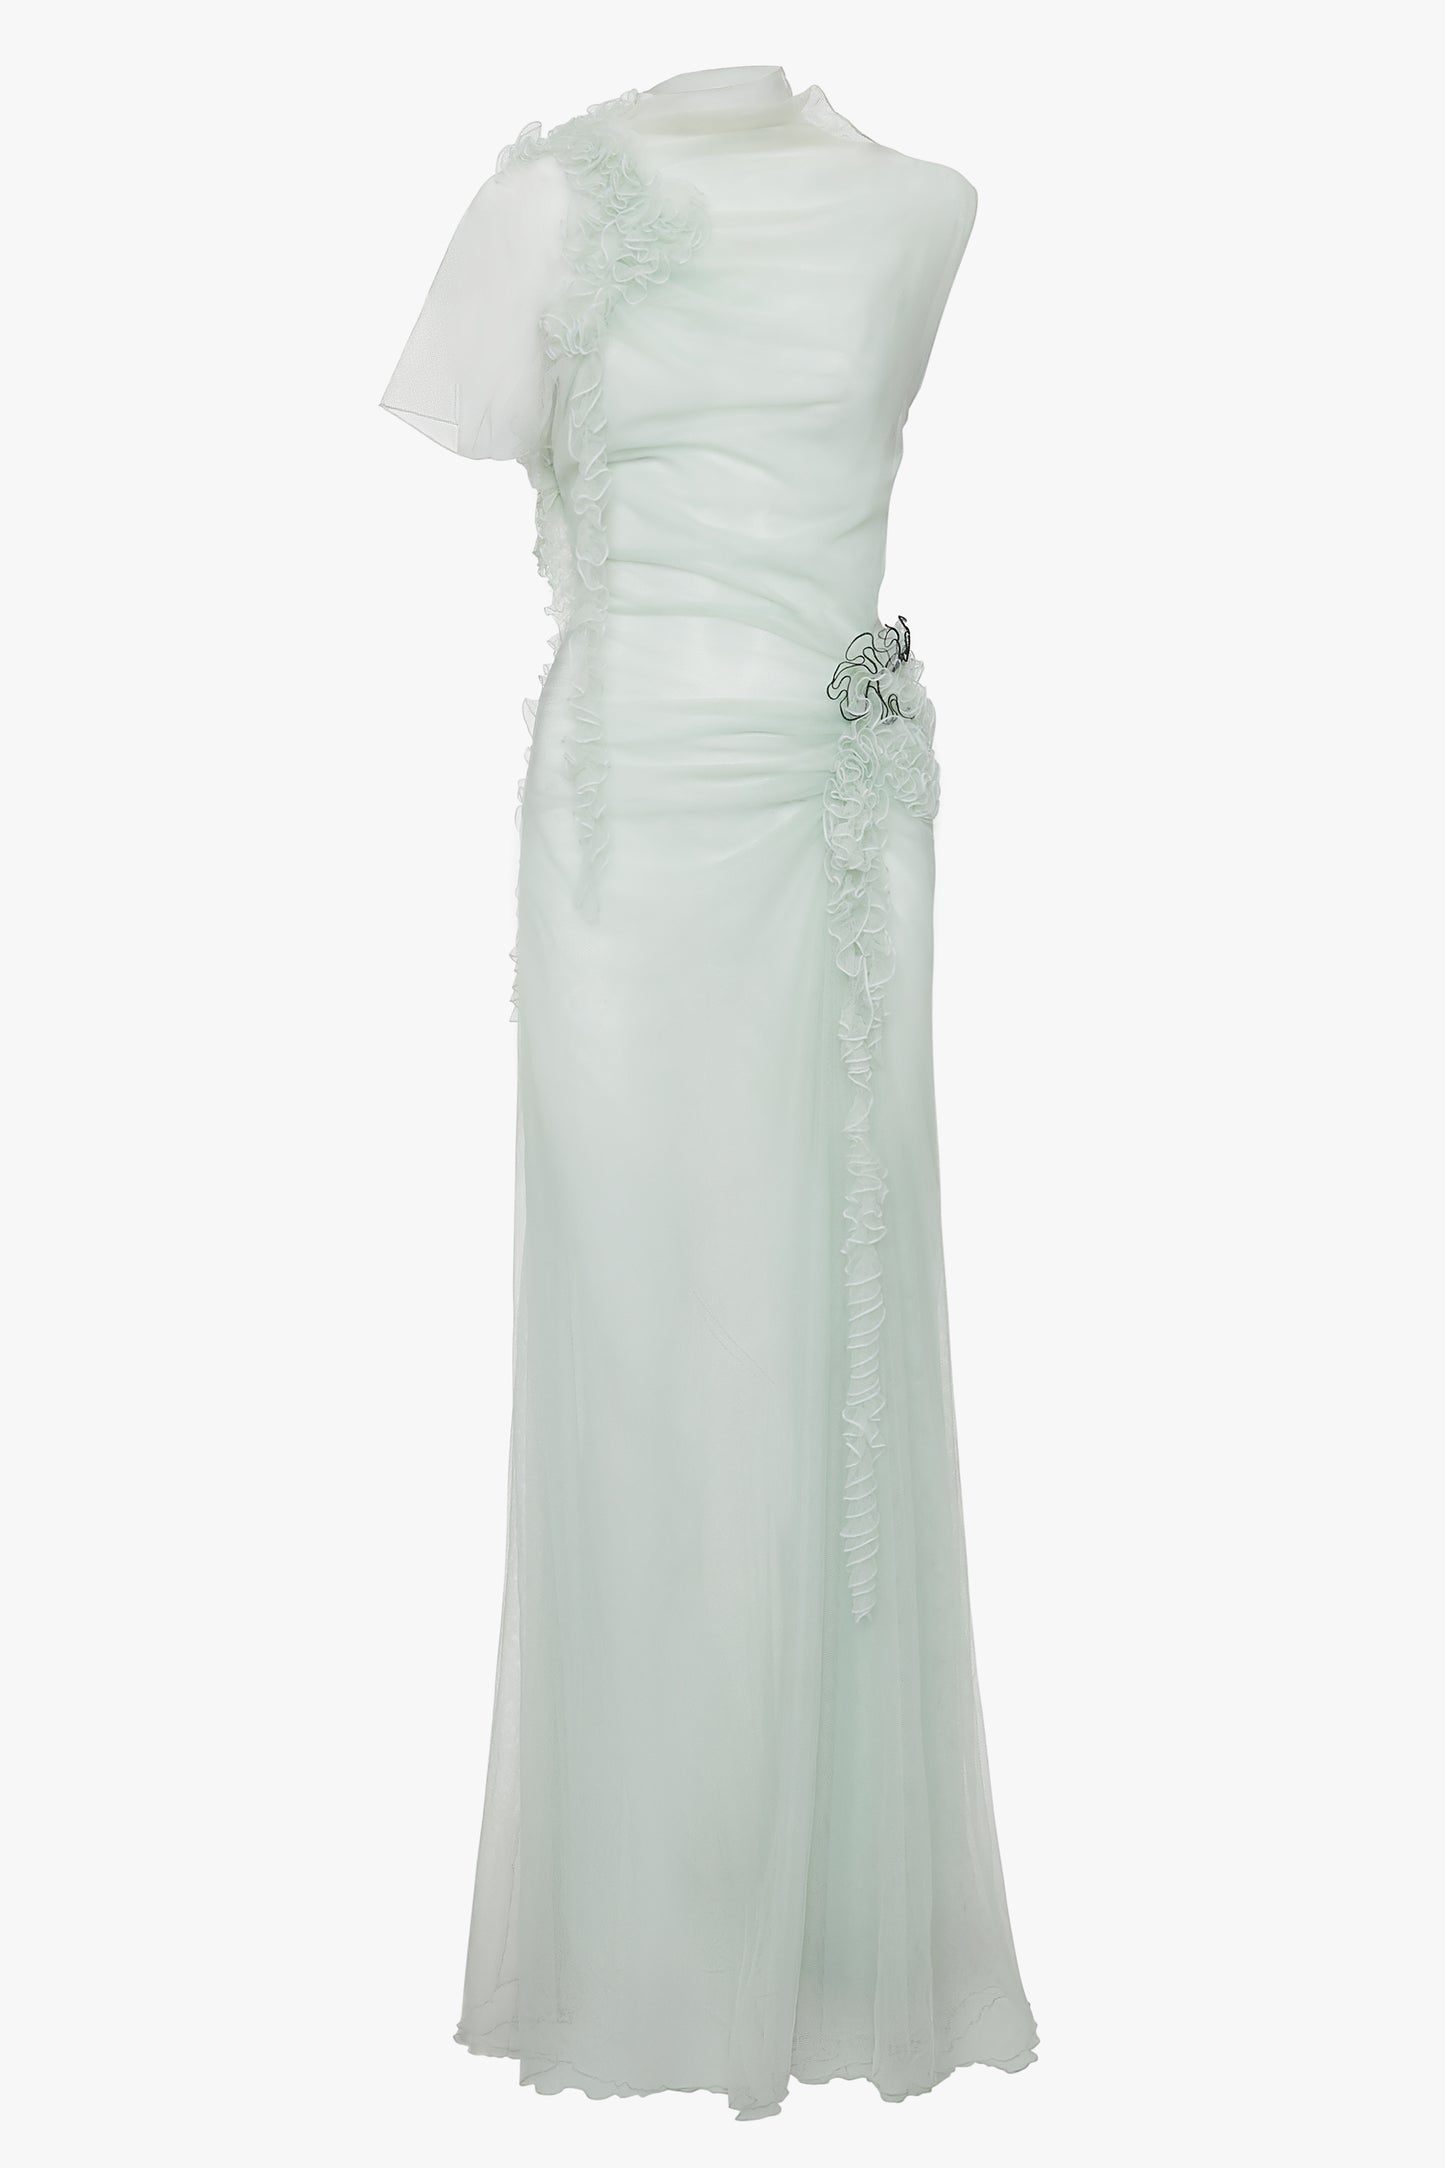 A Victoria Beckham Gathered Tulle Detail Floor-Length Dress In Jade with one sheer sleeve, floral ruche detailing on the waist, and an ethereal quality that's sure to captivate.